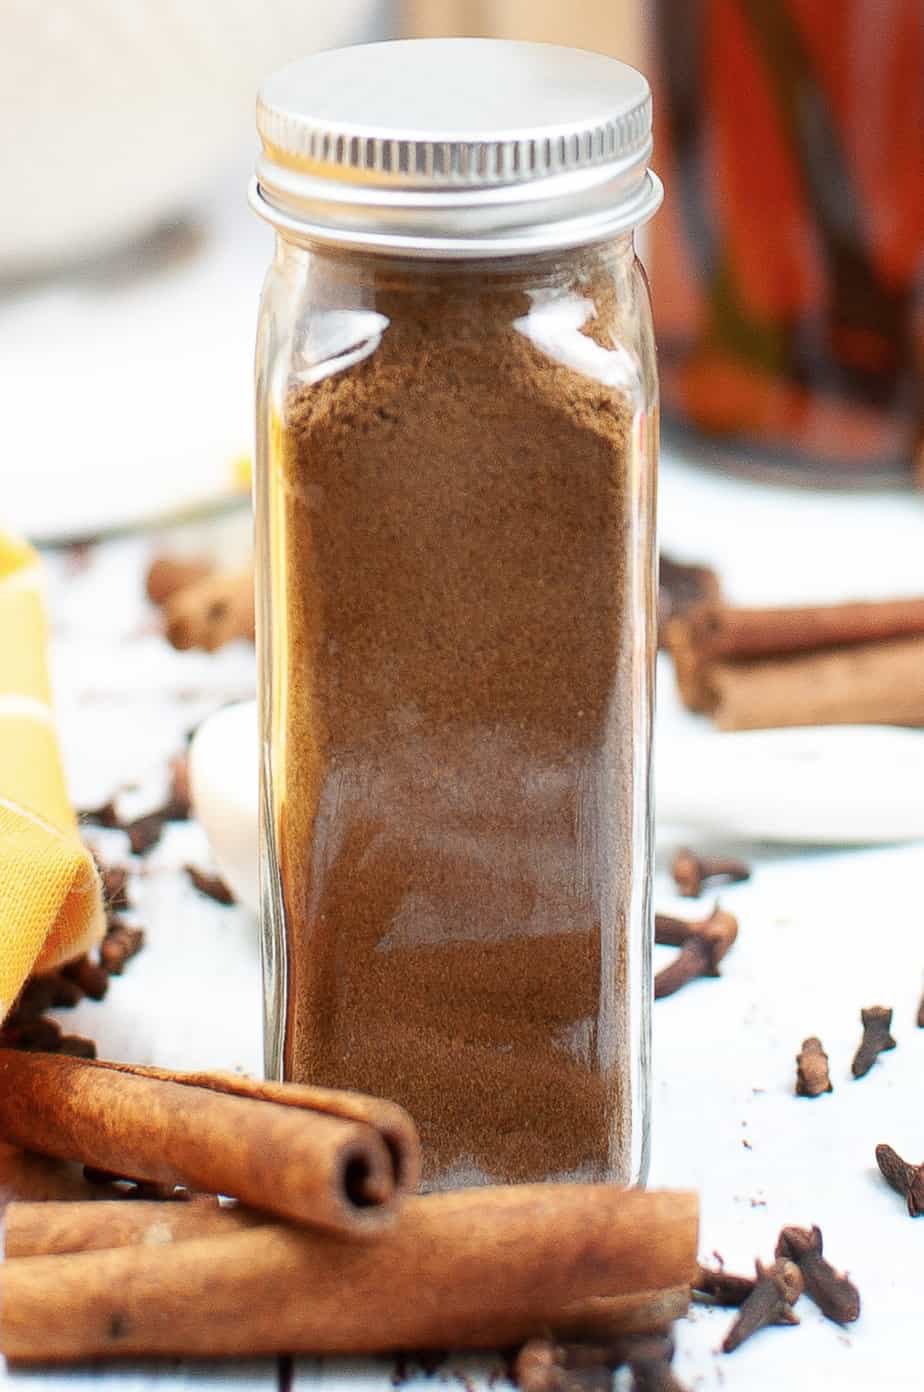 Pumpkin pie spice in a clear jar with a metal lid from the side with cinnamon next to it on the table.